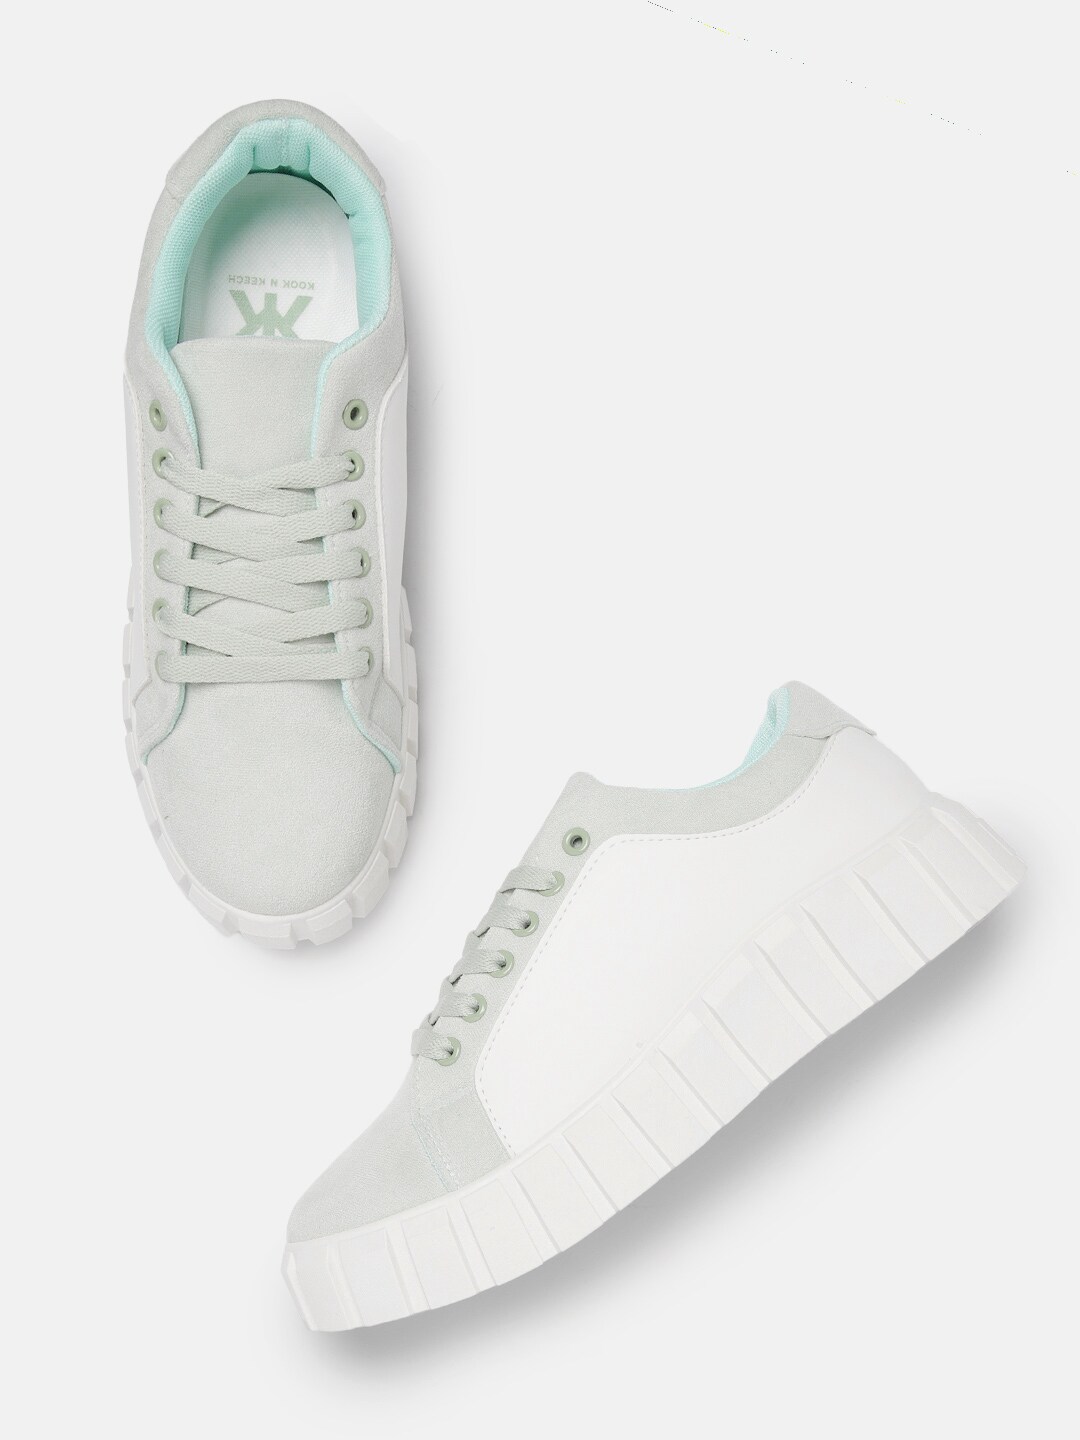 Kook N Keech Women Mint Green & White Colourblocked Flatforms with Suede Finish Price in India